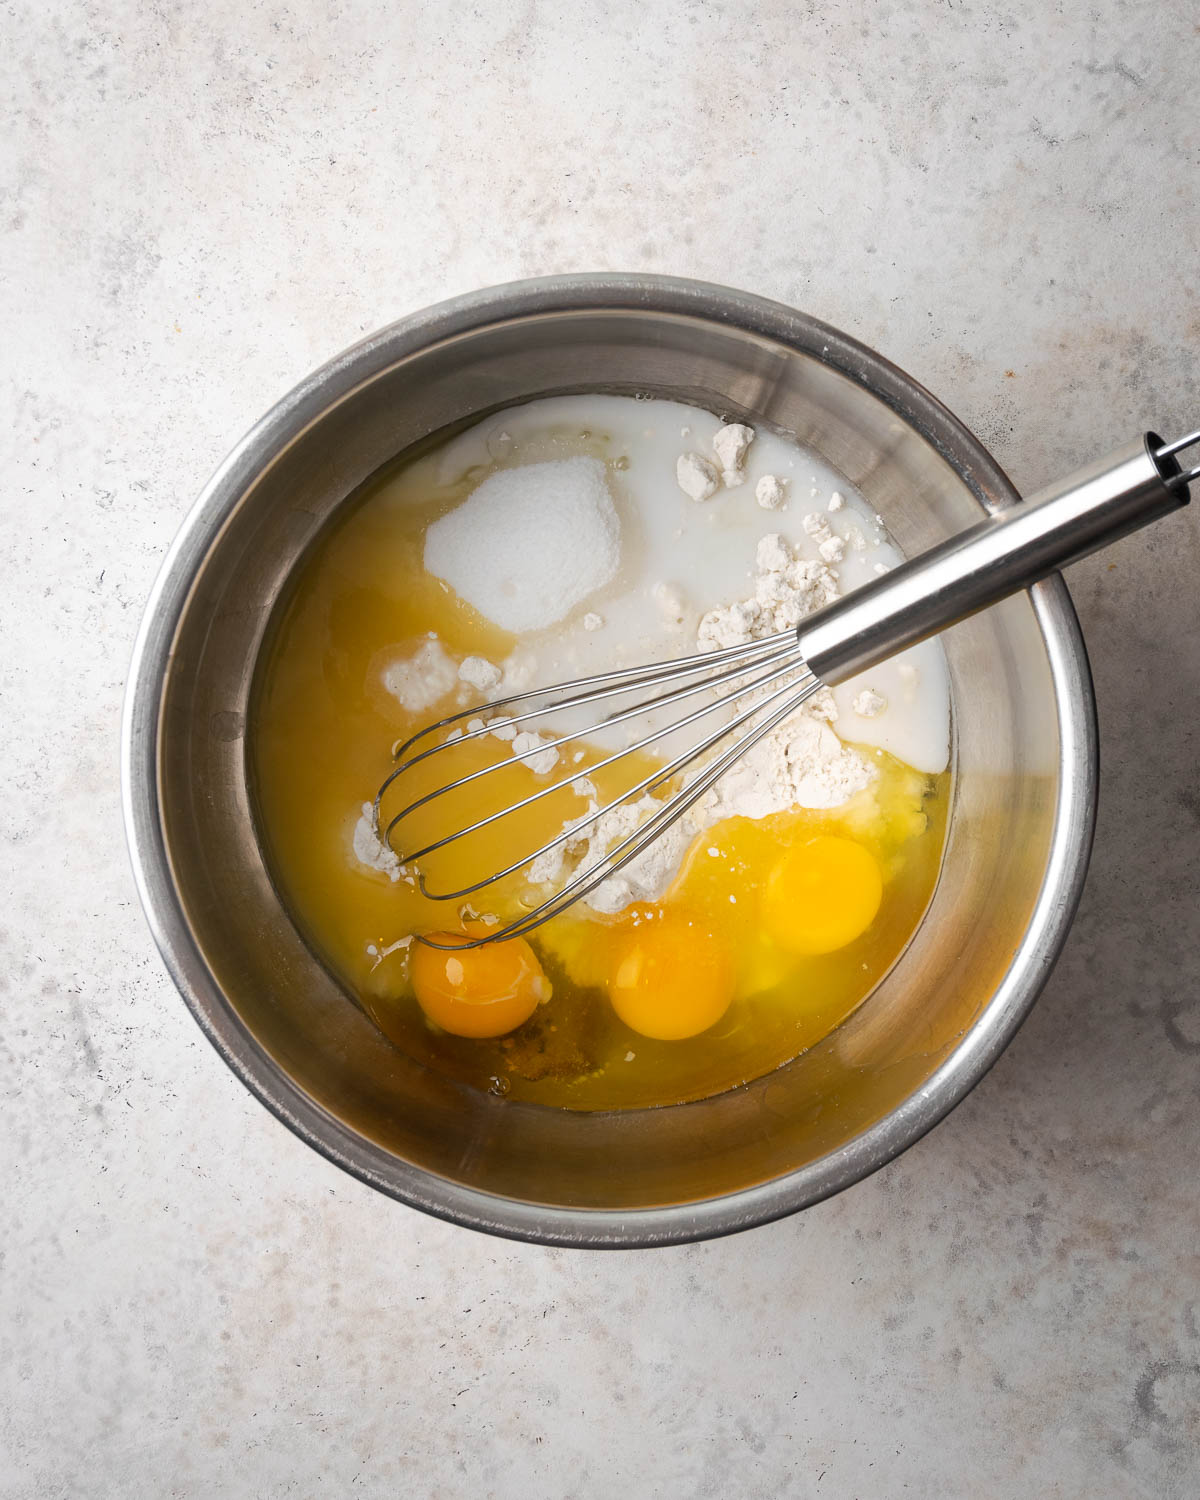 Eggs and milk added to the dry ingredients in a metal mixing bowl.